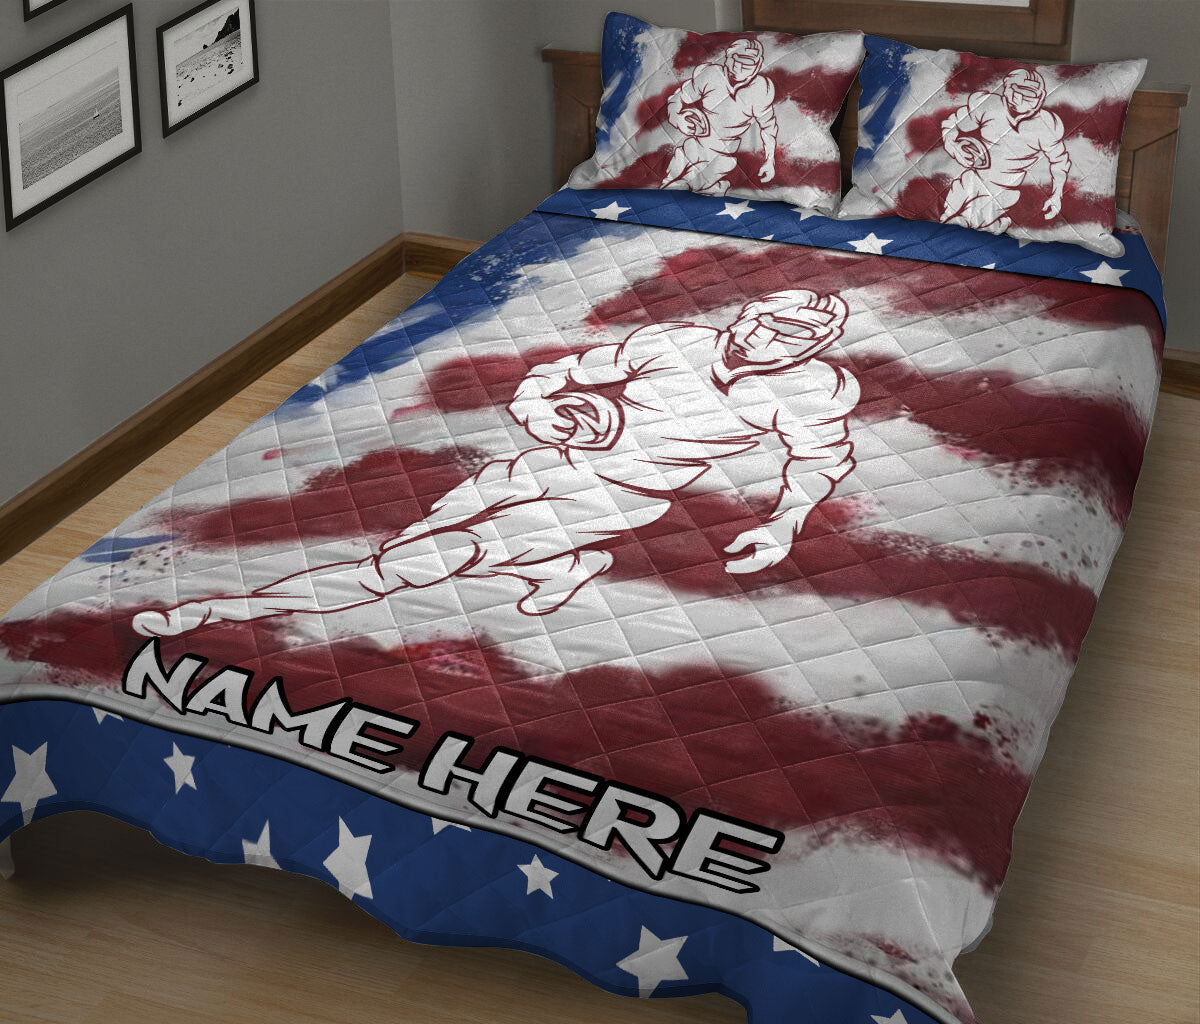 Ohaprints-Quilt-Bed-Set-Pillowcase-American-Football-American-Us-Flag-Sports-Lover-Gift-Custom-Personalized-Name-Blanket-Bedspread-Bedding-354-King (90'' x 100'')